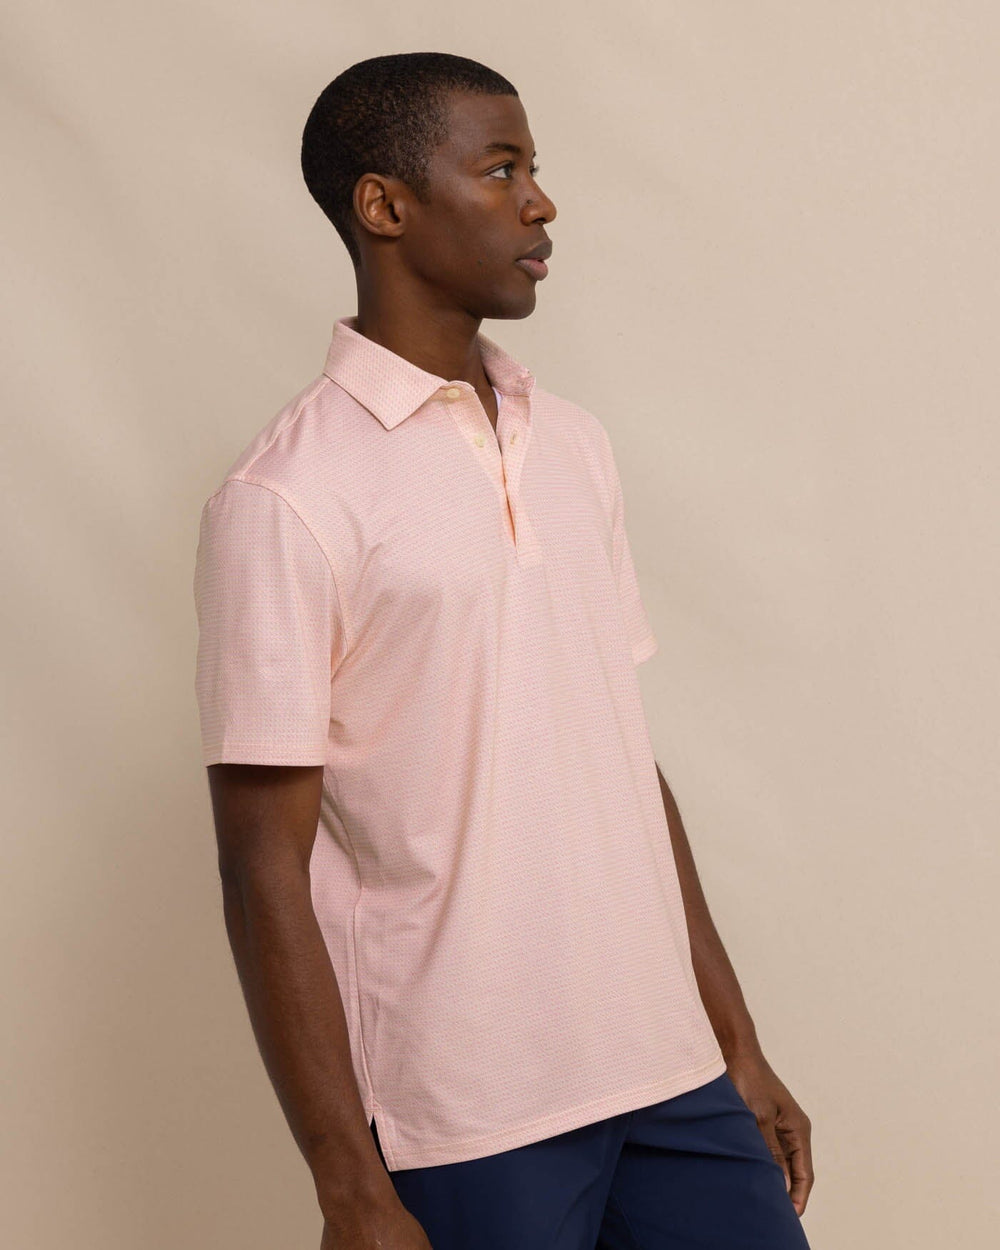 The front view of the Southern Tide Driver Getting Ziggy With It Printed Polo by Southern Tide - Apricot Blush Coral